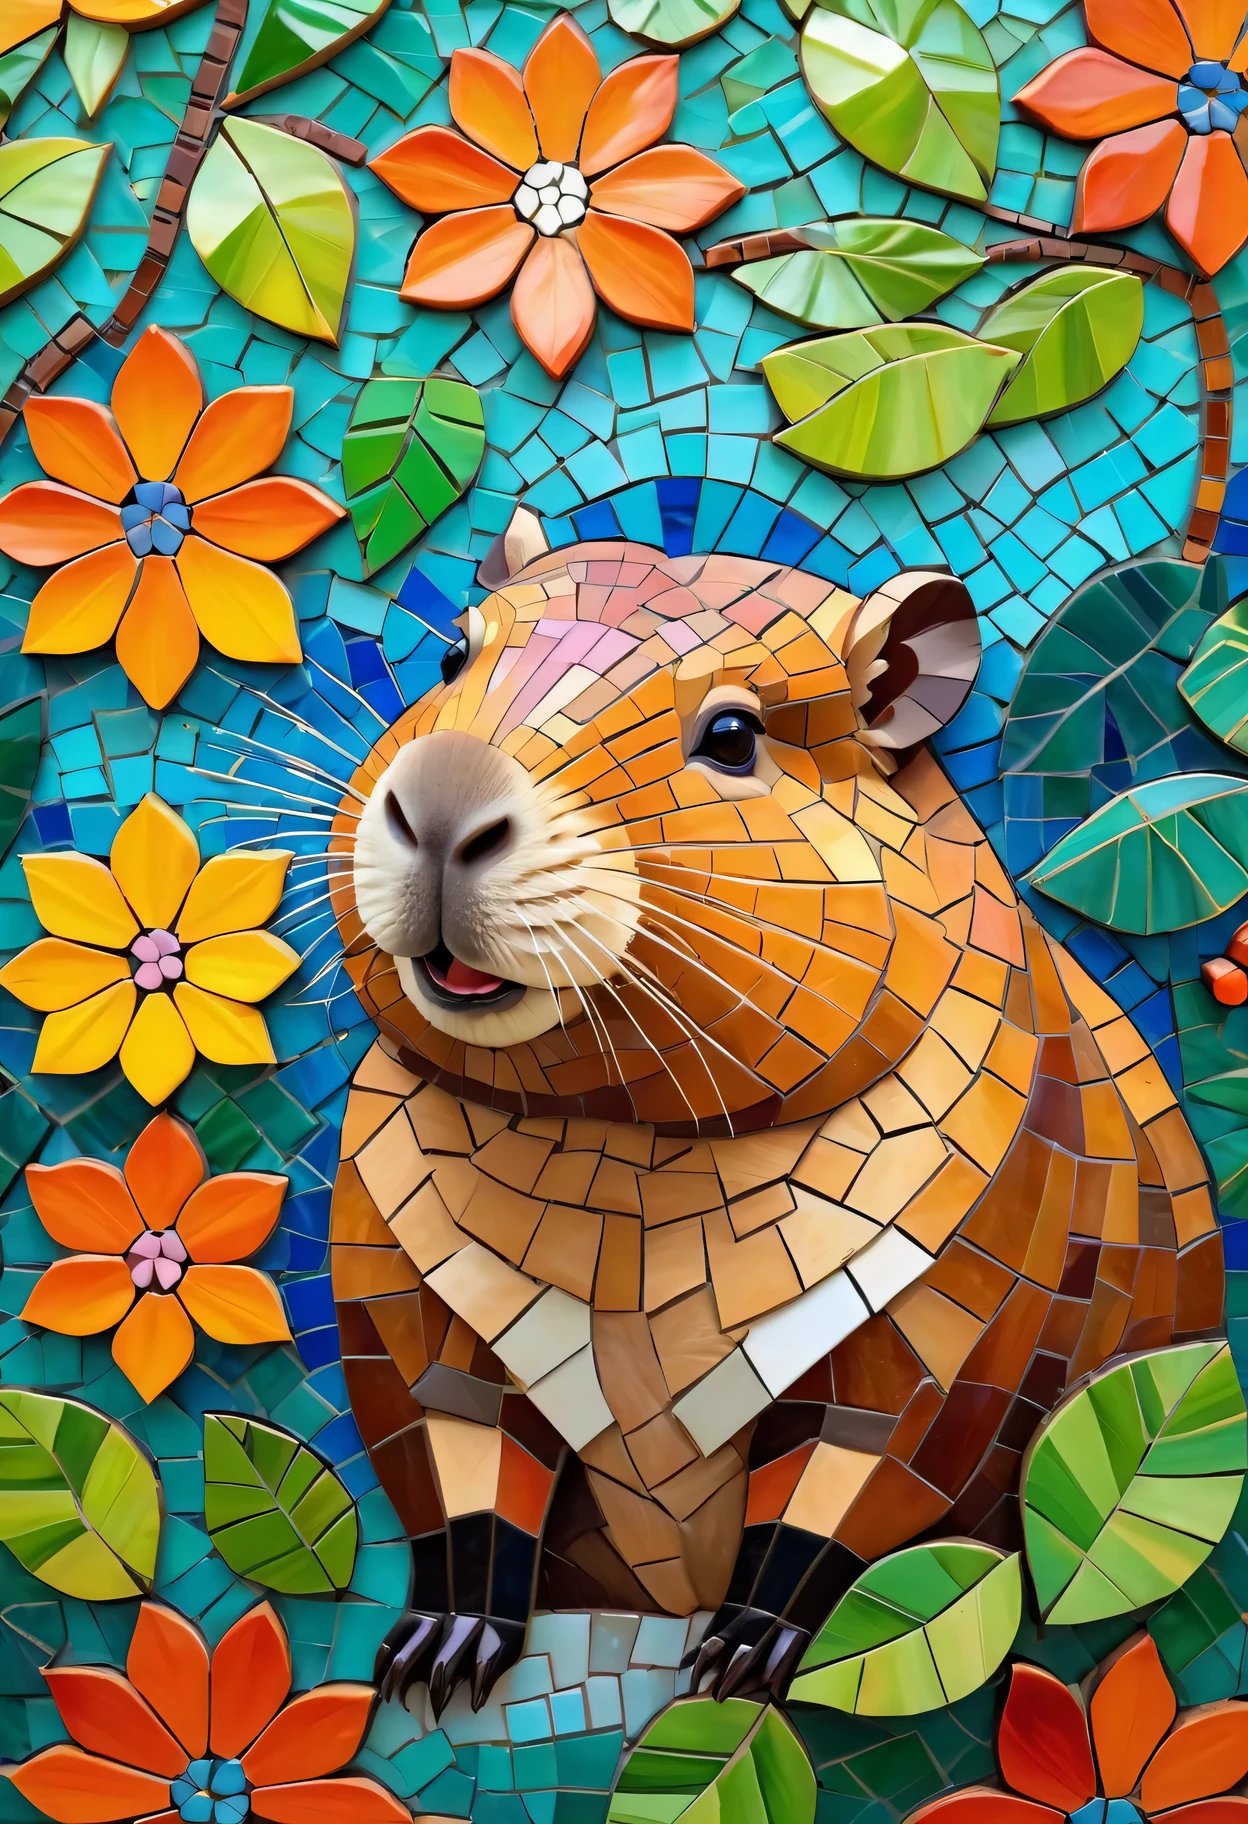 mosaic style:capybara,playful,whimsical, vibrant colors,texture, intricately designed, mosaic patterns, lively atmosphere, soft lighting, peaceful backdrop, lush greenery, harmonious composition, multi-faceted, furry texture, detailed fur, expressive eyes, adorable expression, relaxed and content, mosaic artwork, cheerful vibe, mosaic tiles, charming scene, joyful ambiance